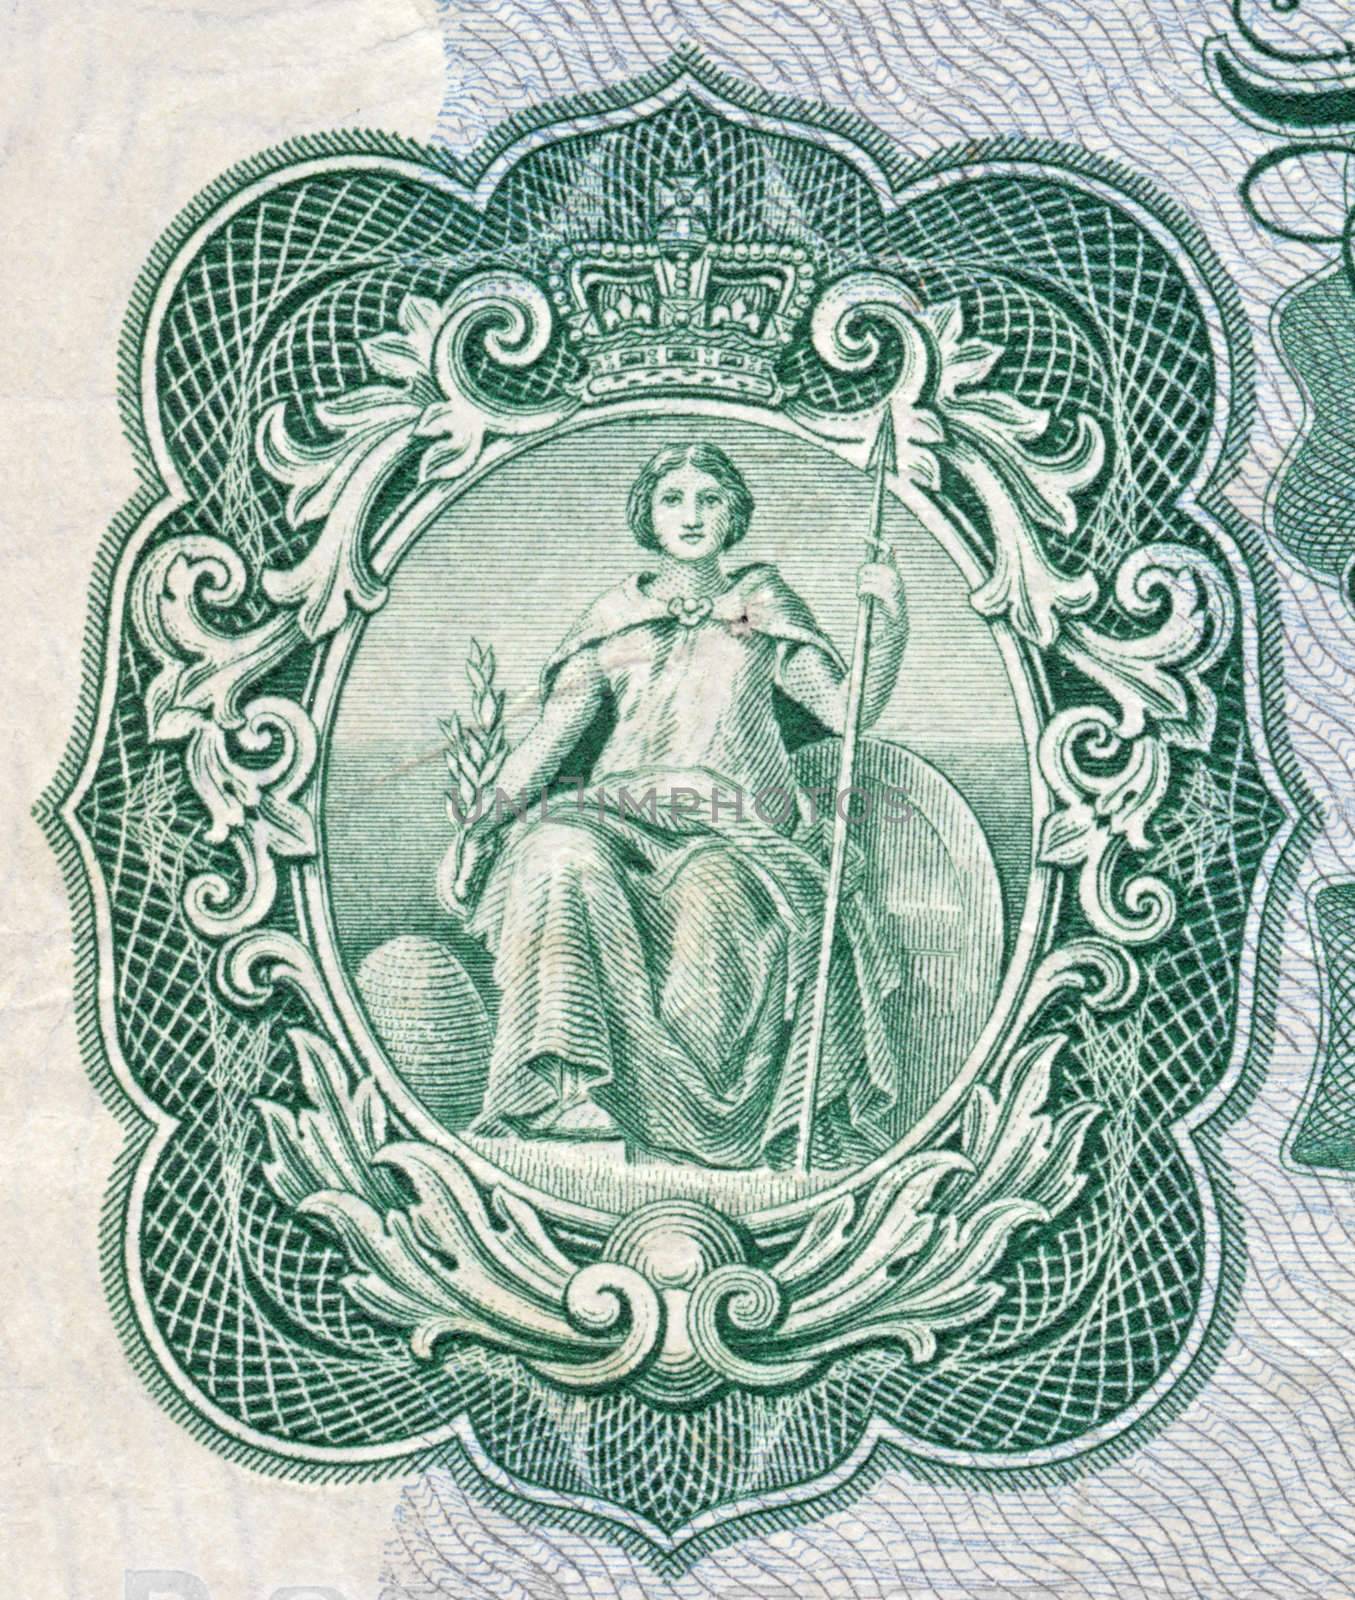 Britannia as depicted on an old English bank note by RuthBlack